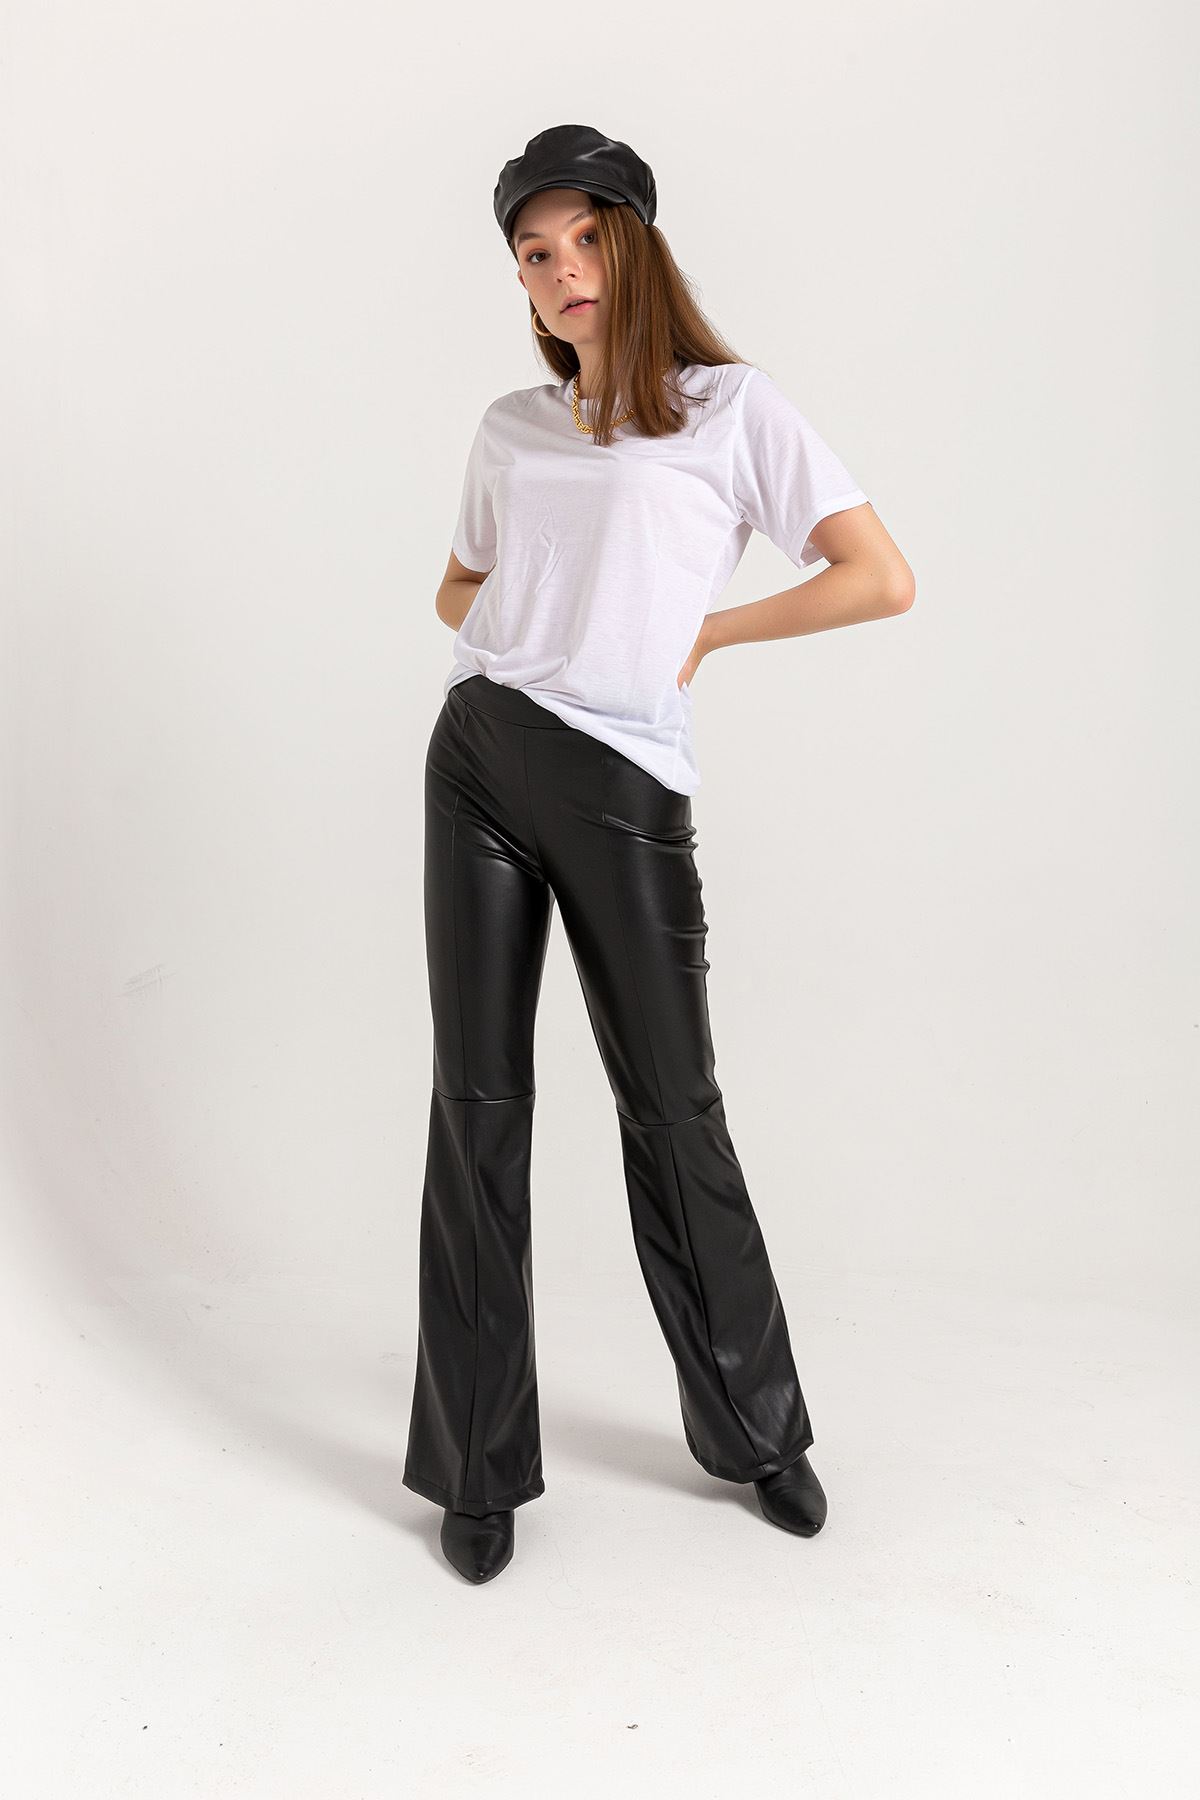 Leather Fabric Long Tigth Fit Flare Women'S Trouser - Black